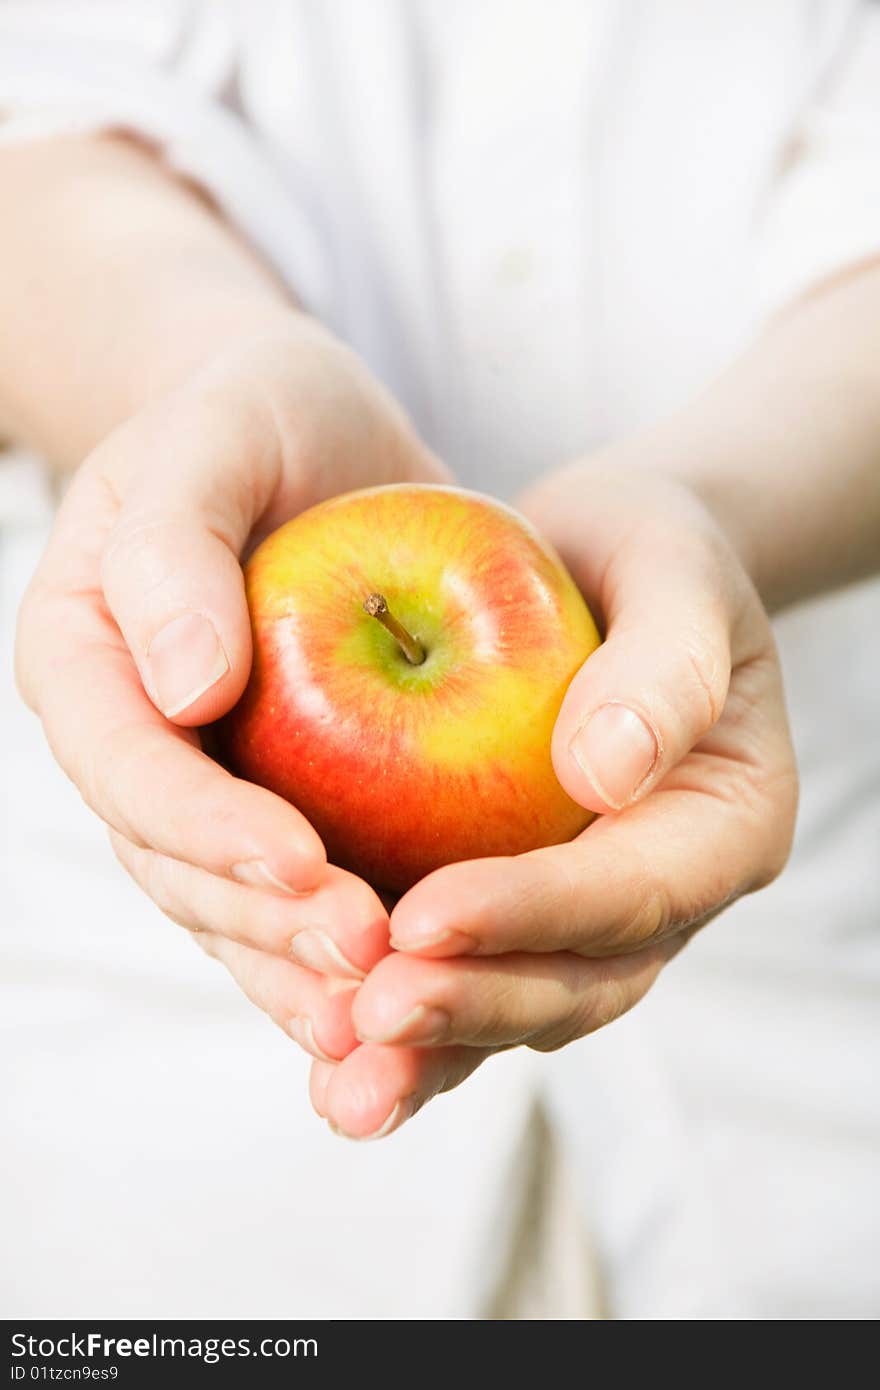 Woman's hands holding a ripe apple